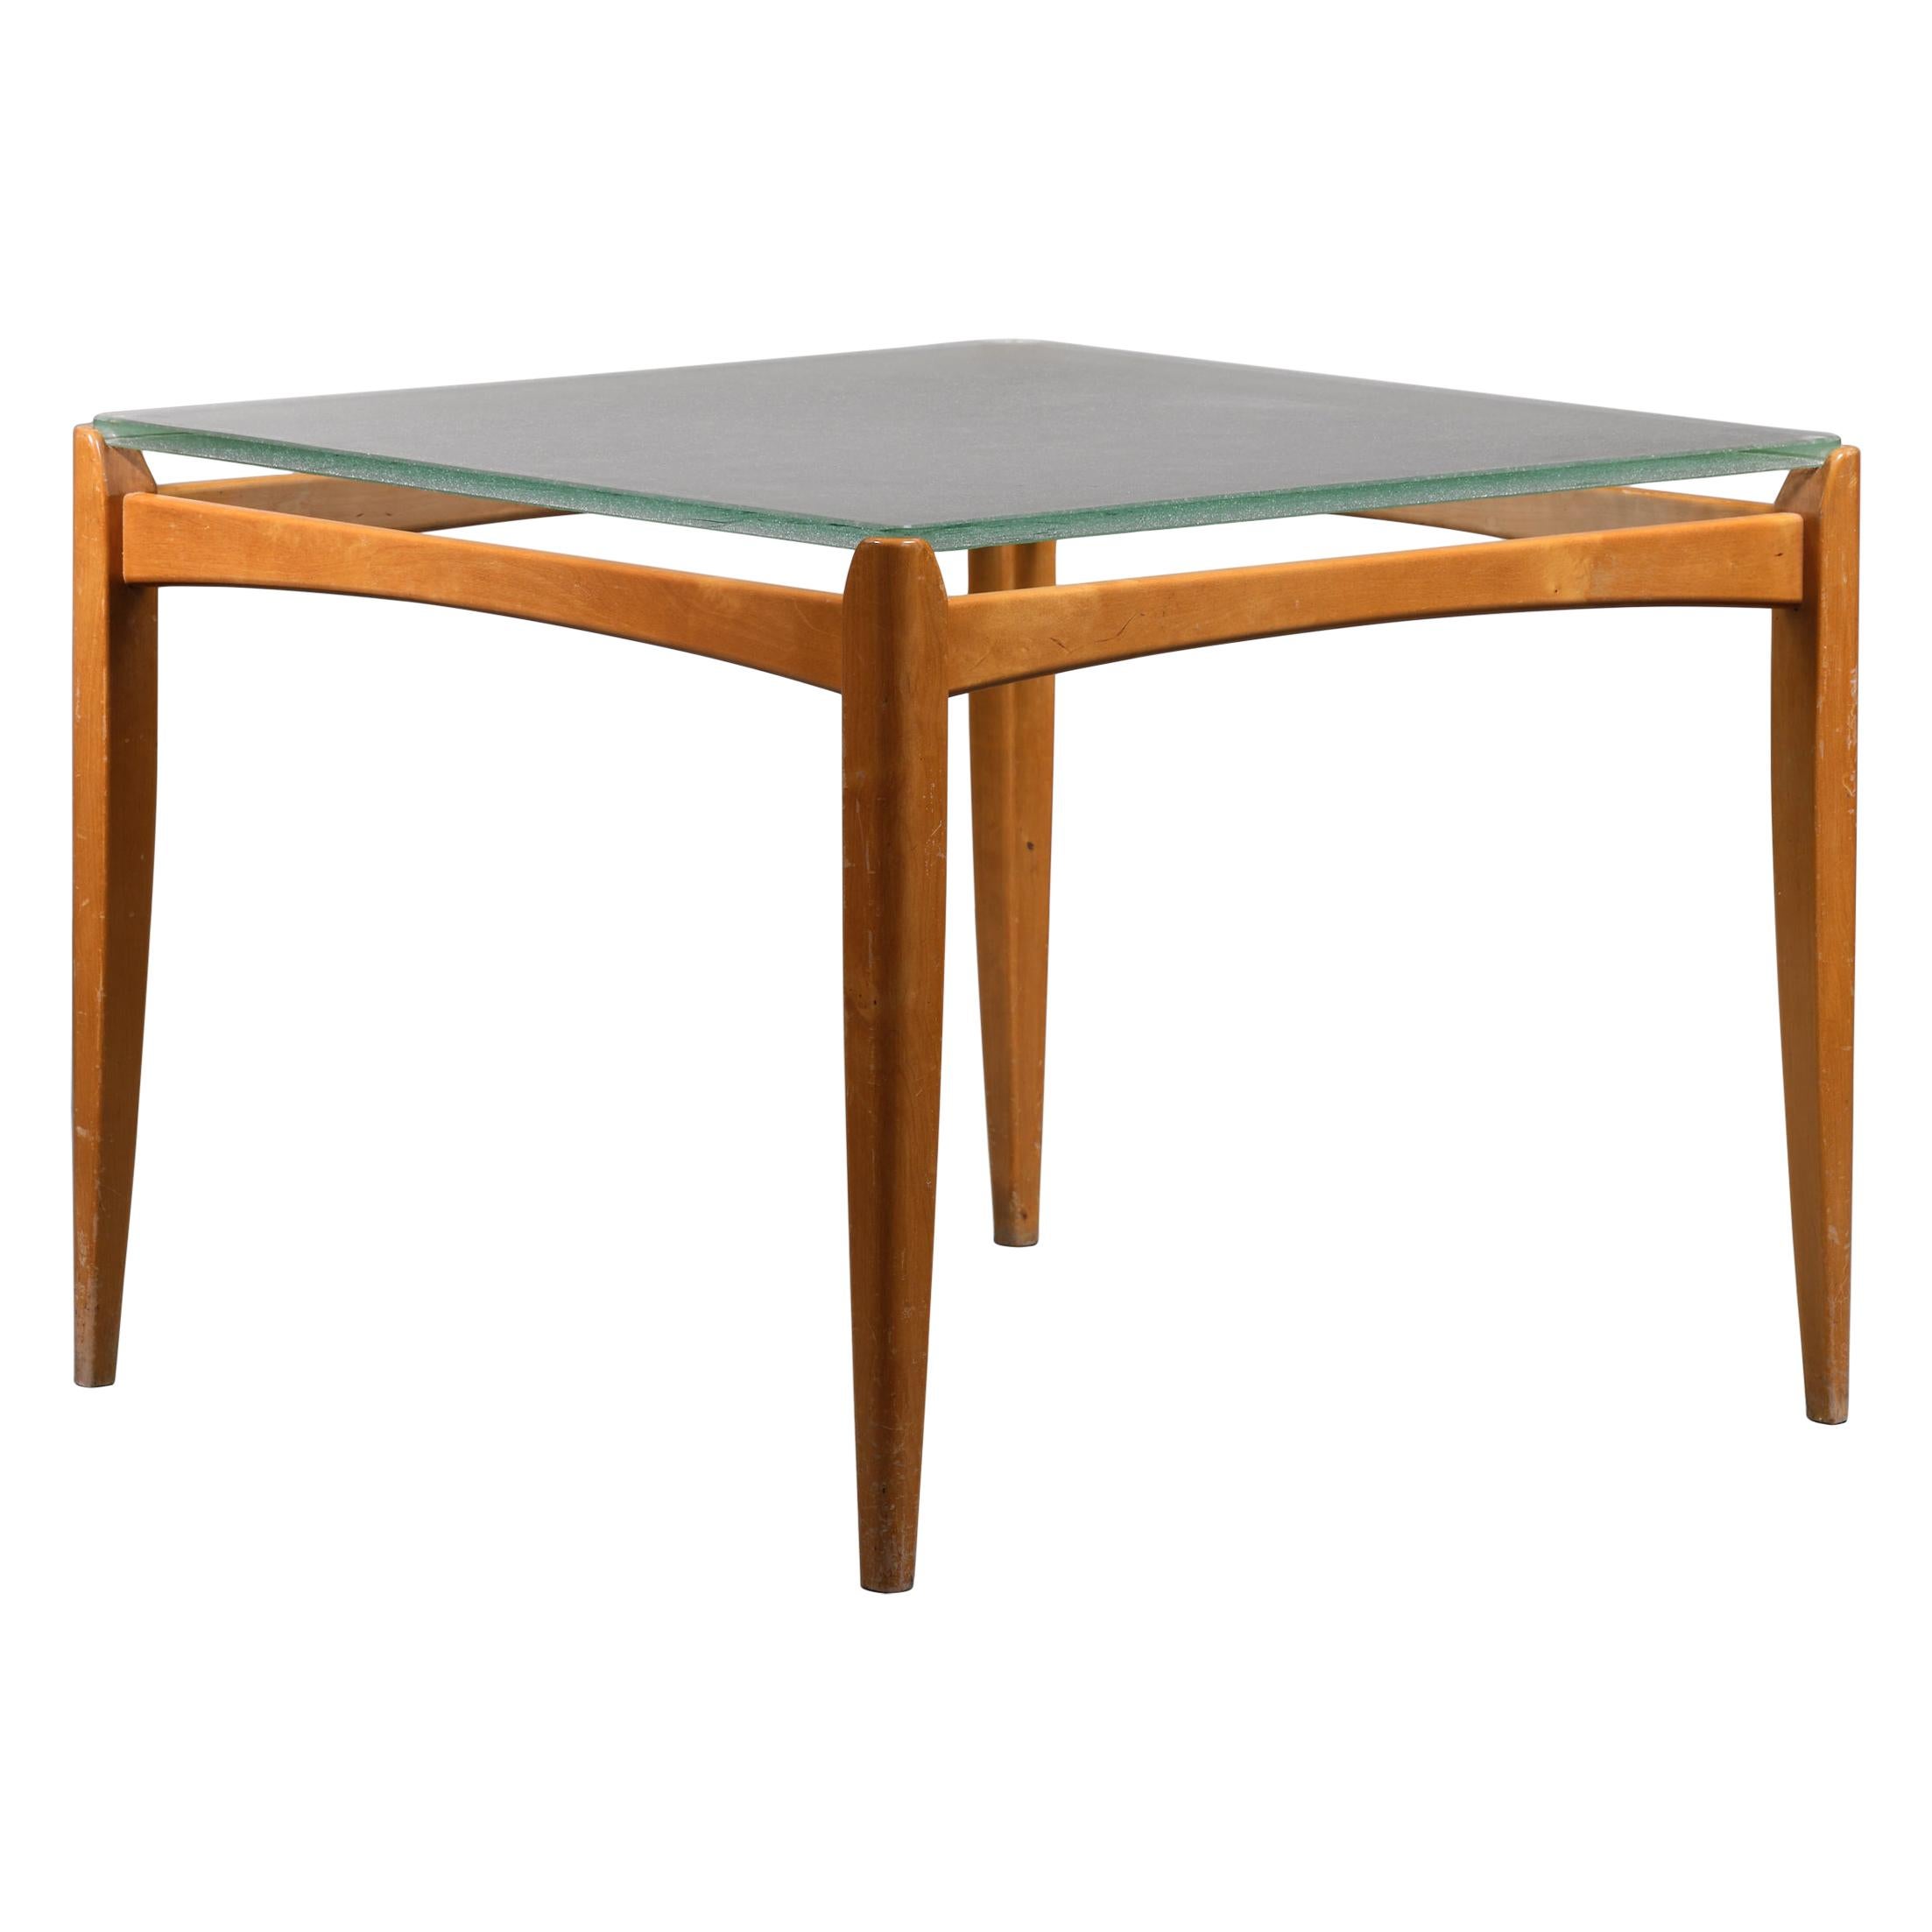 Axel Larsson Table with Glass Top, Bodafors, Sweden, 1930s For Sale